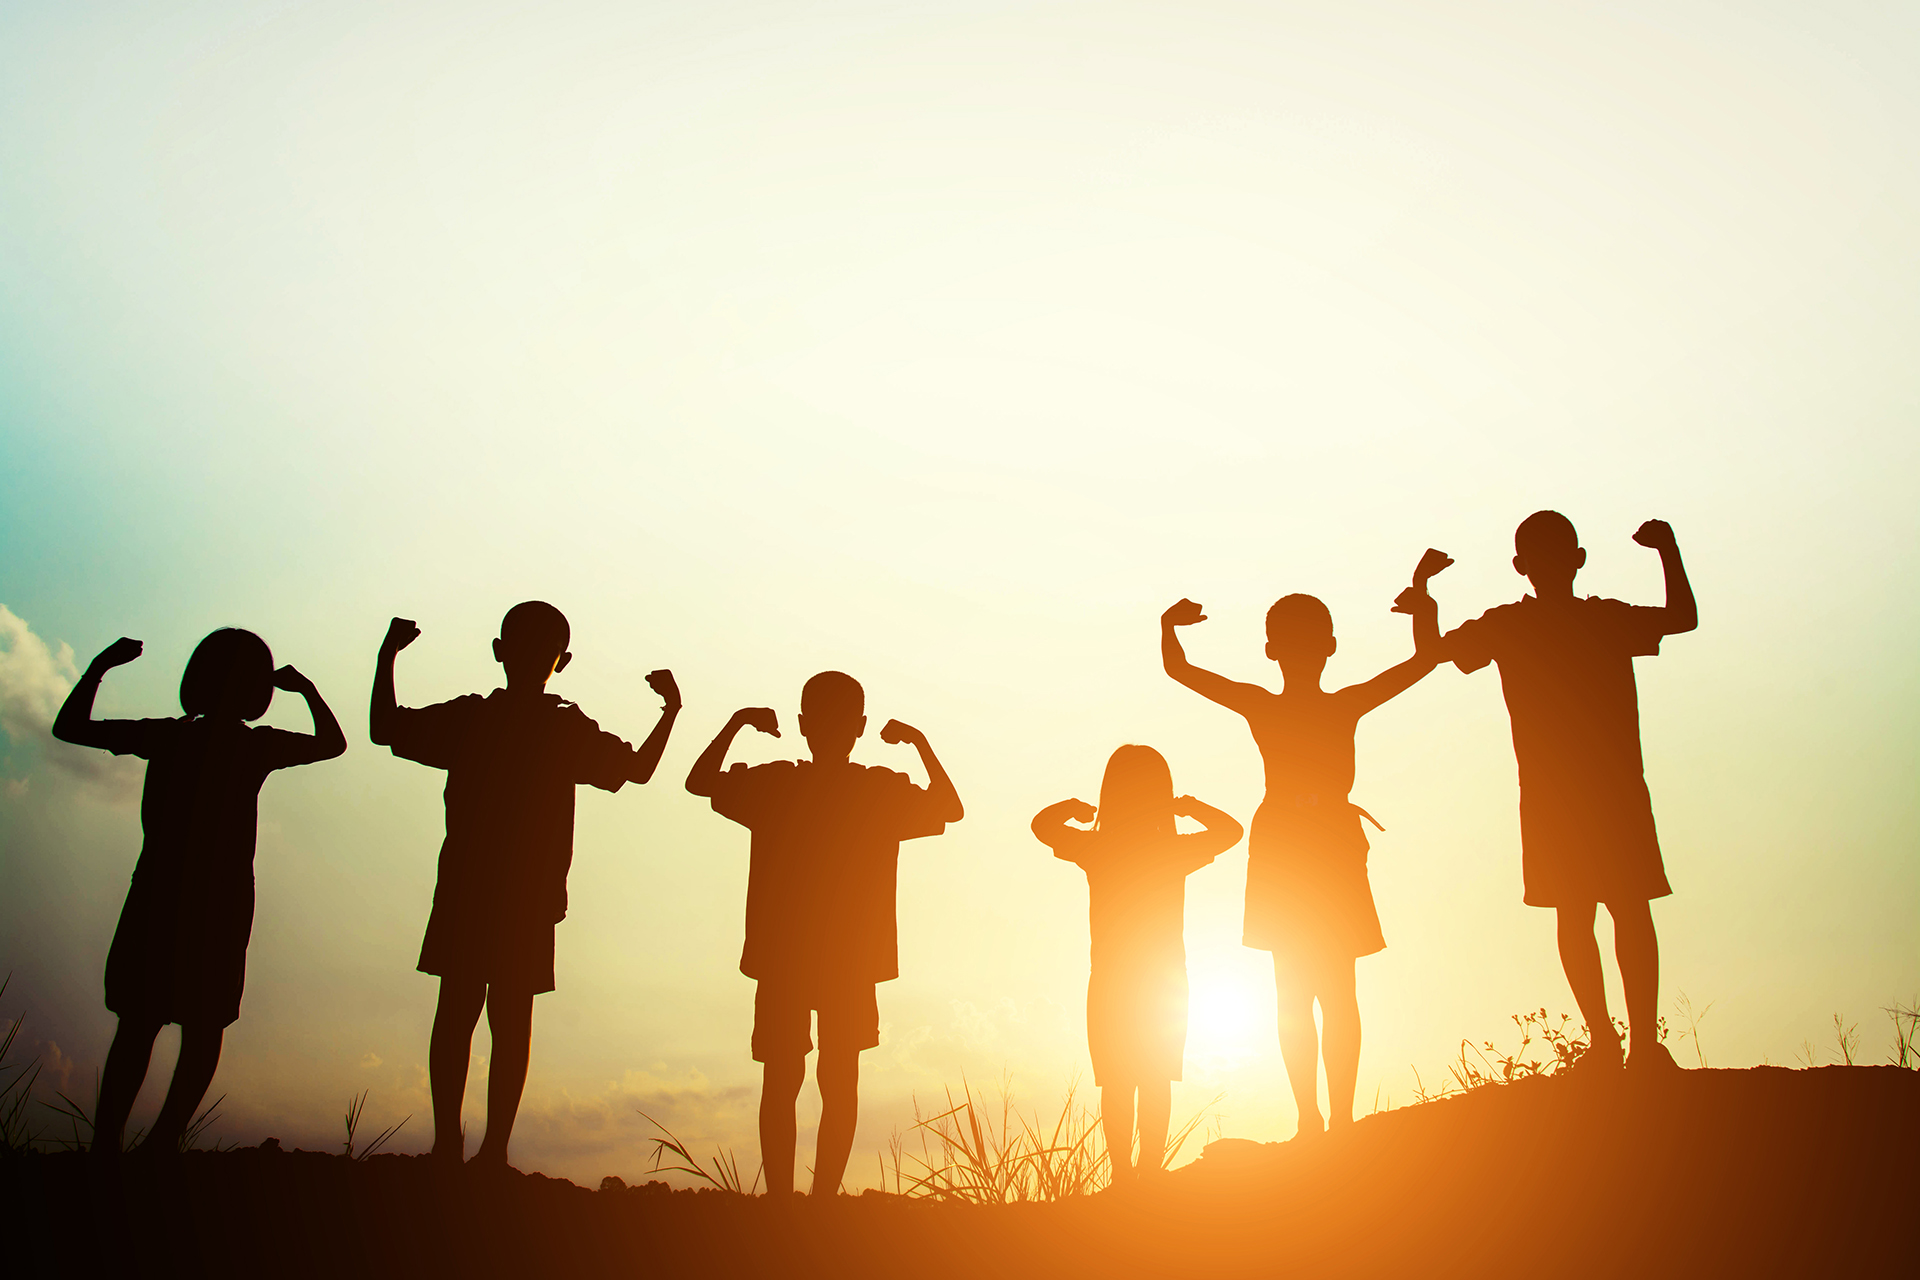 Silhouettes of a group of kids standing and showing their strength  